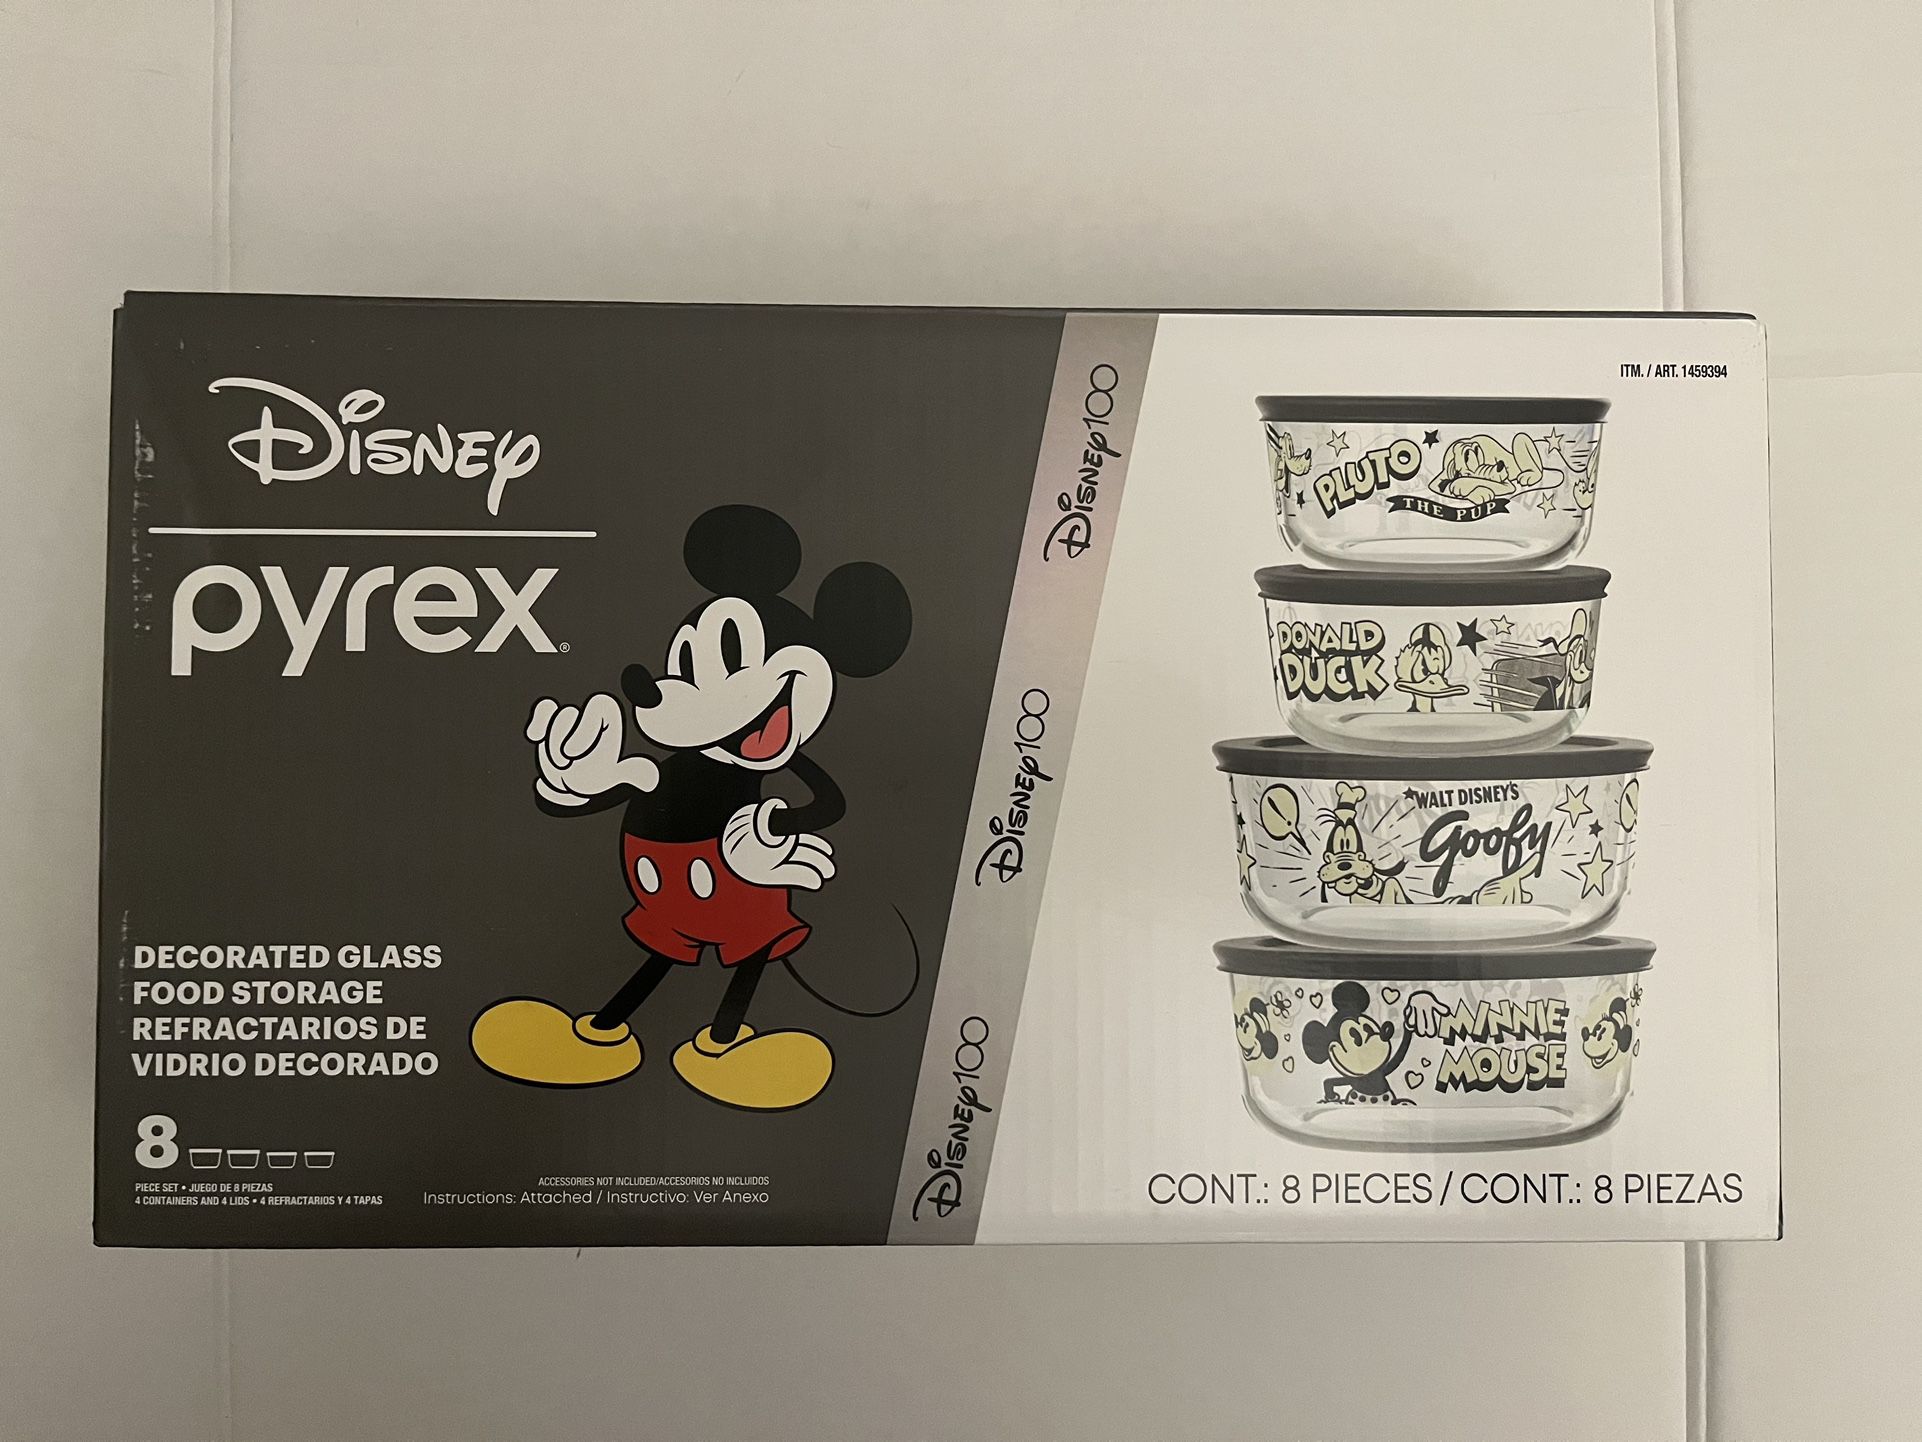 4-cup Round Glass Storage, Disney Commemorative Series - 100 Years